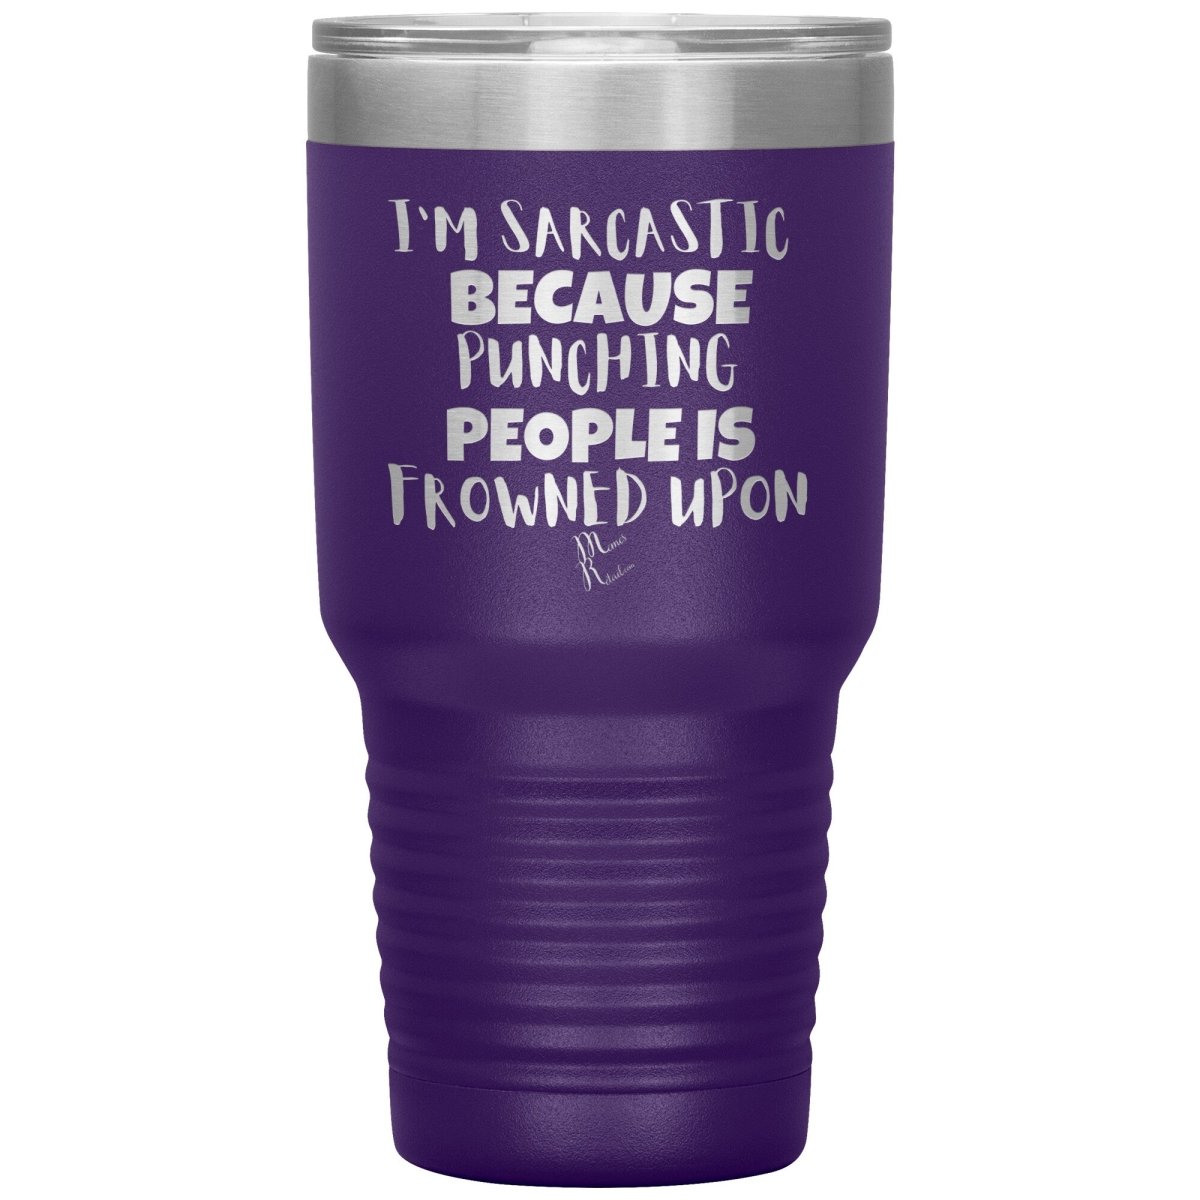 I'm Sarcastic Because Punching People is Frowned Upon Tumblers, 30oz Insulated Tumbler / Purple - MemesRetail.com